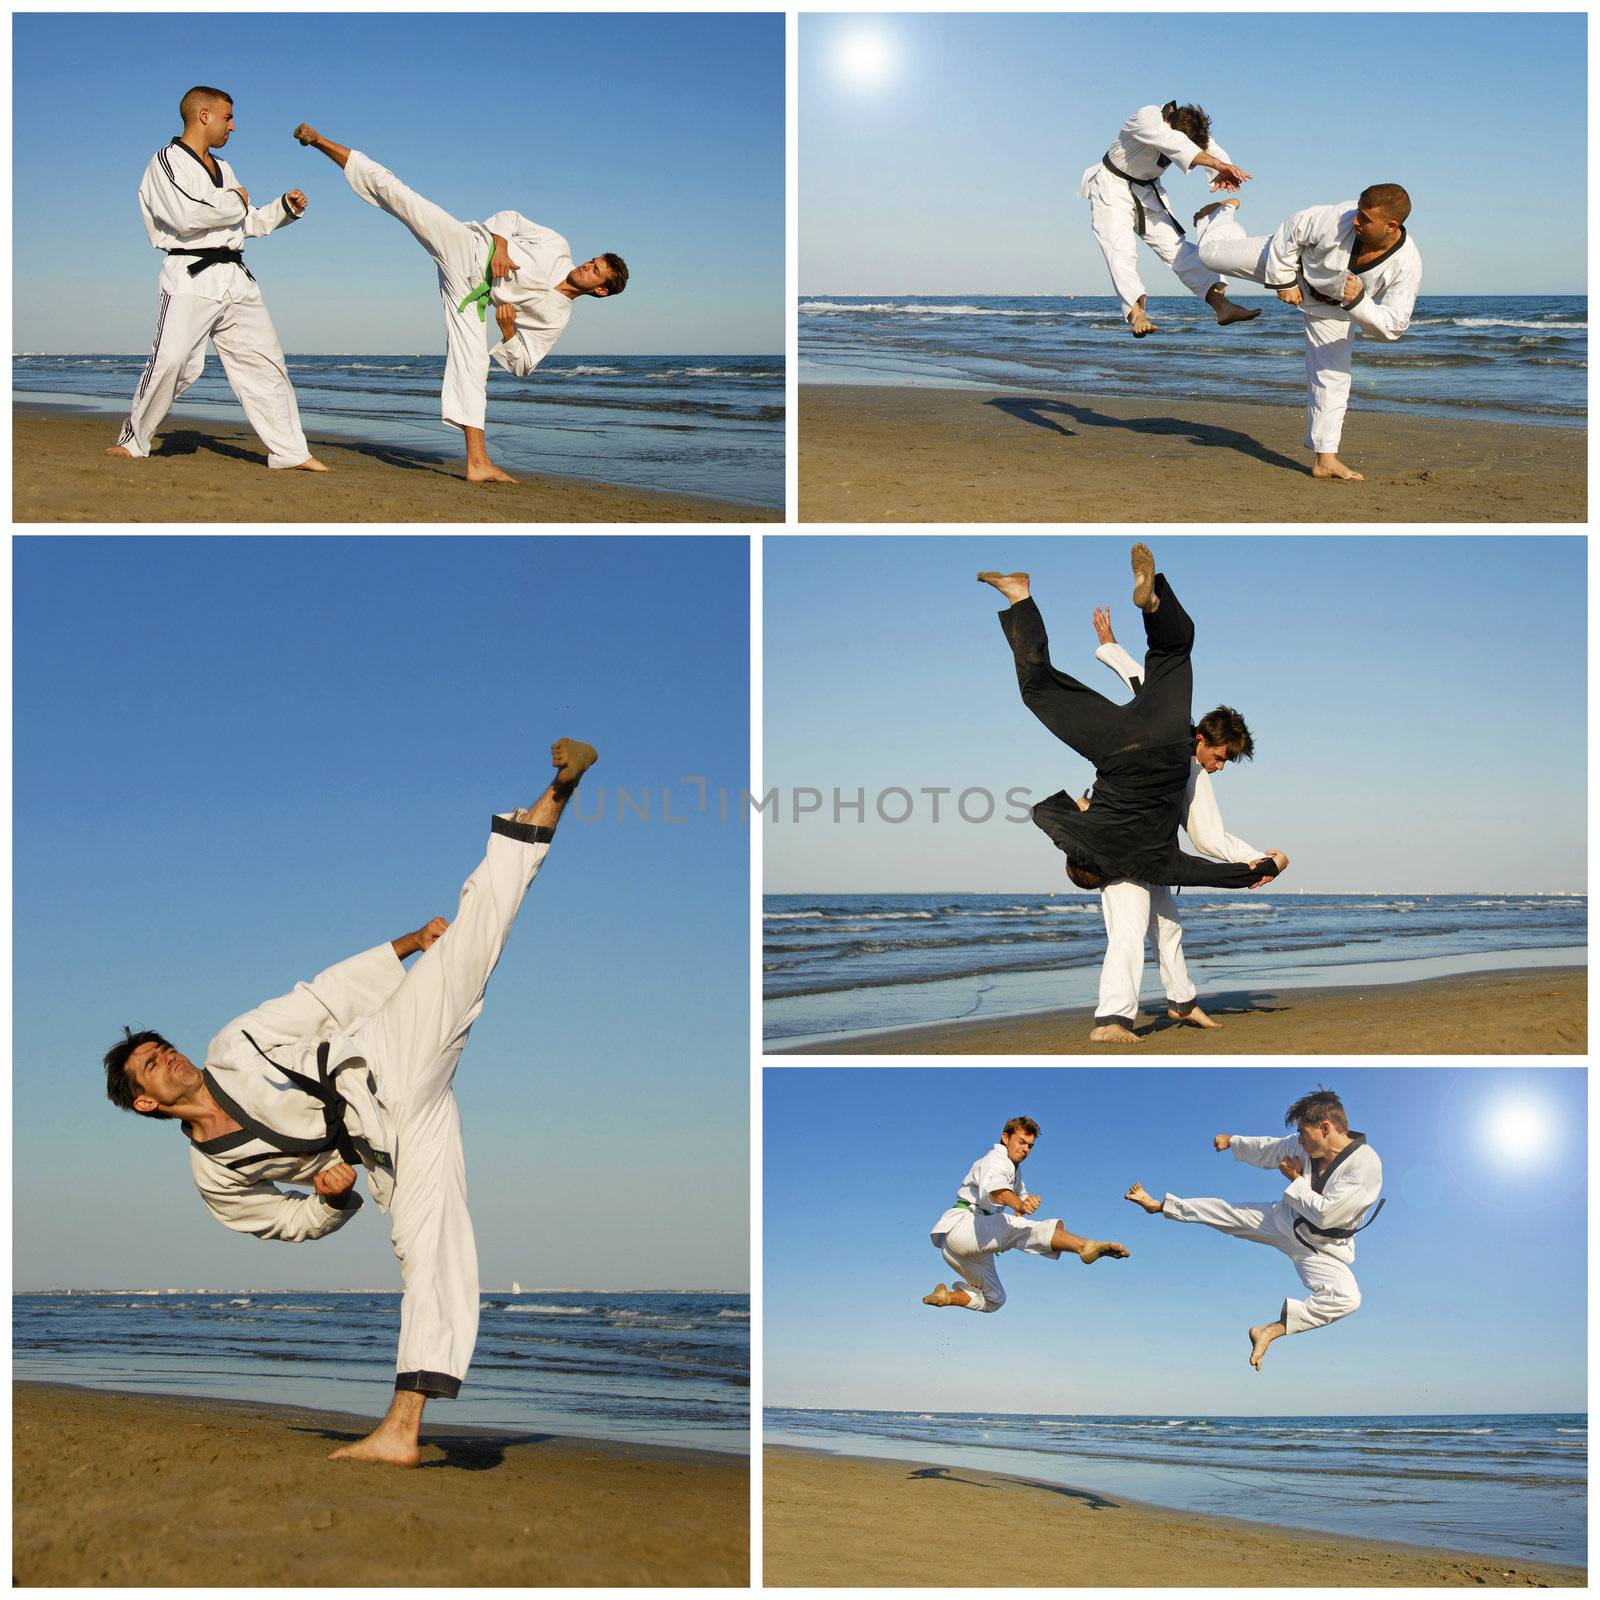 training of aikidofor young men on the beach